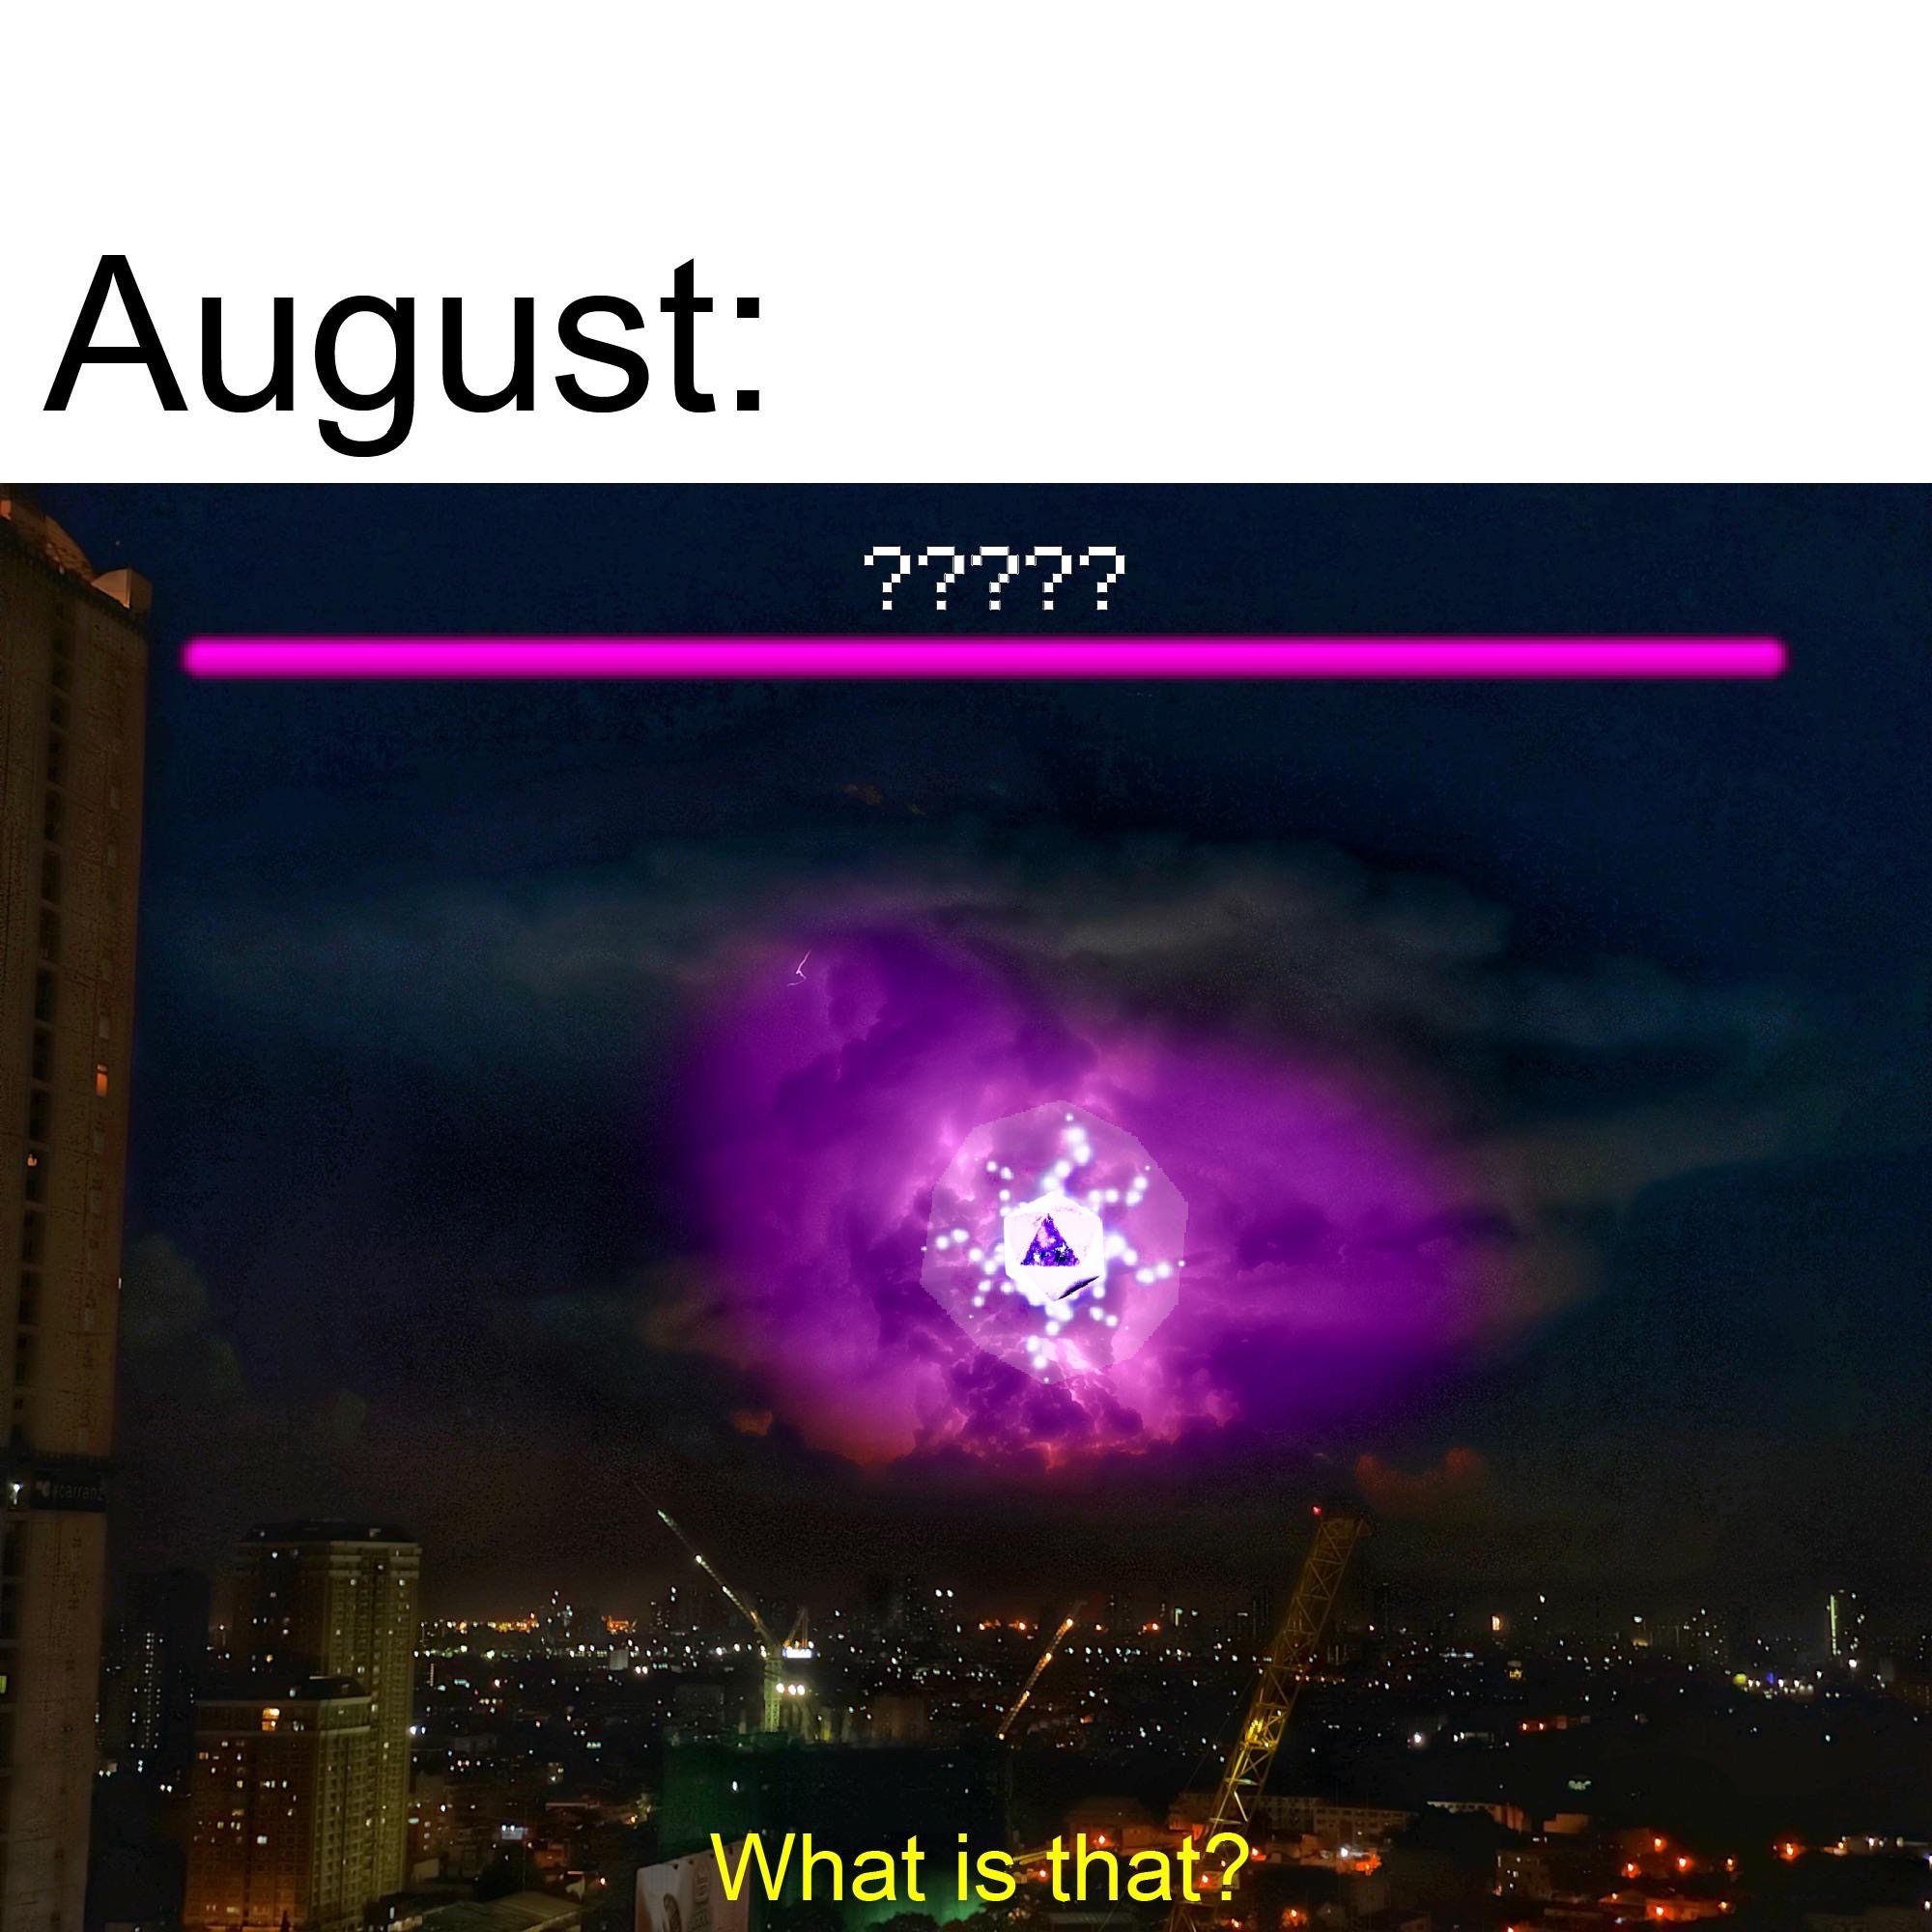 months of the year - August ????? What is that?